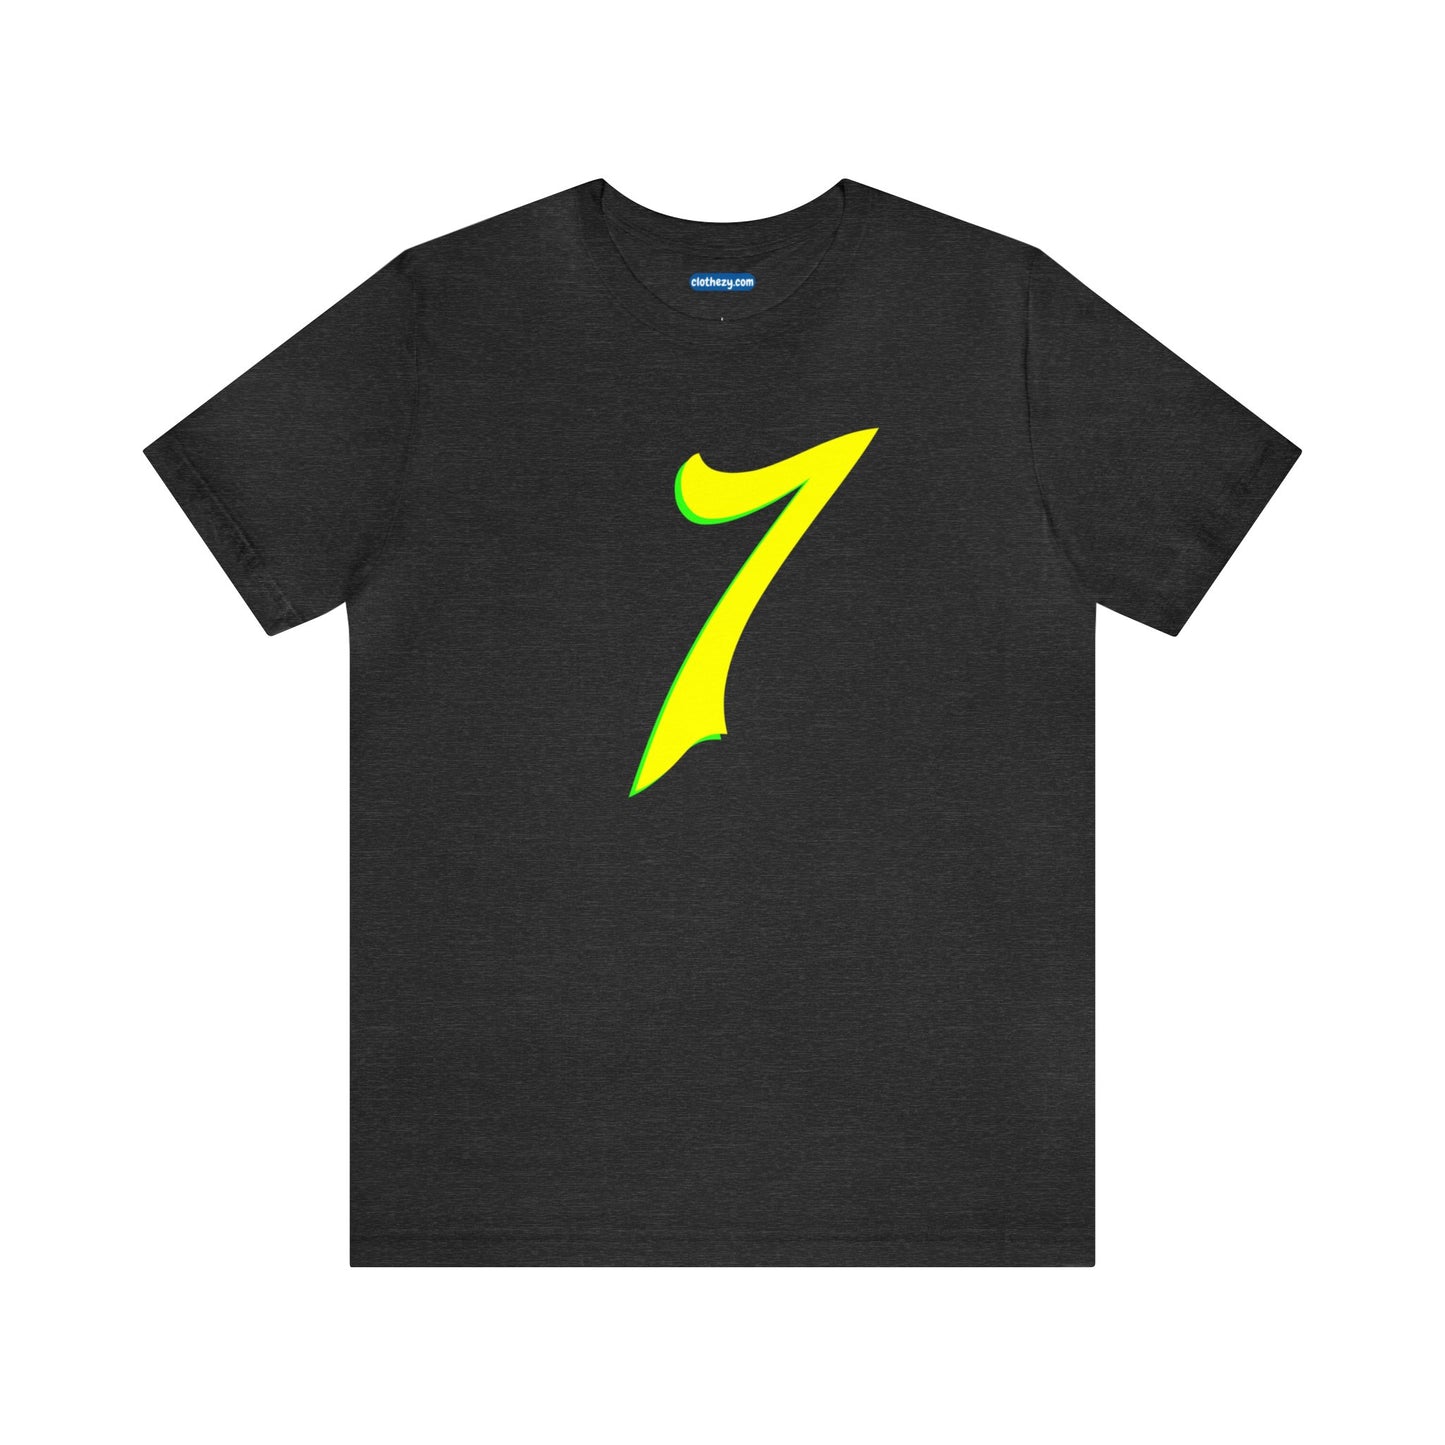 Number 7 Design - Soft Cotton Tee for birthdays and celebrations, Gift for friends and family, Multiple Options by clothezy.com in Gold Size Small - Buy Now